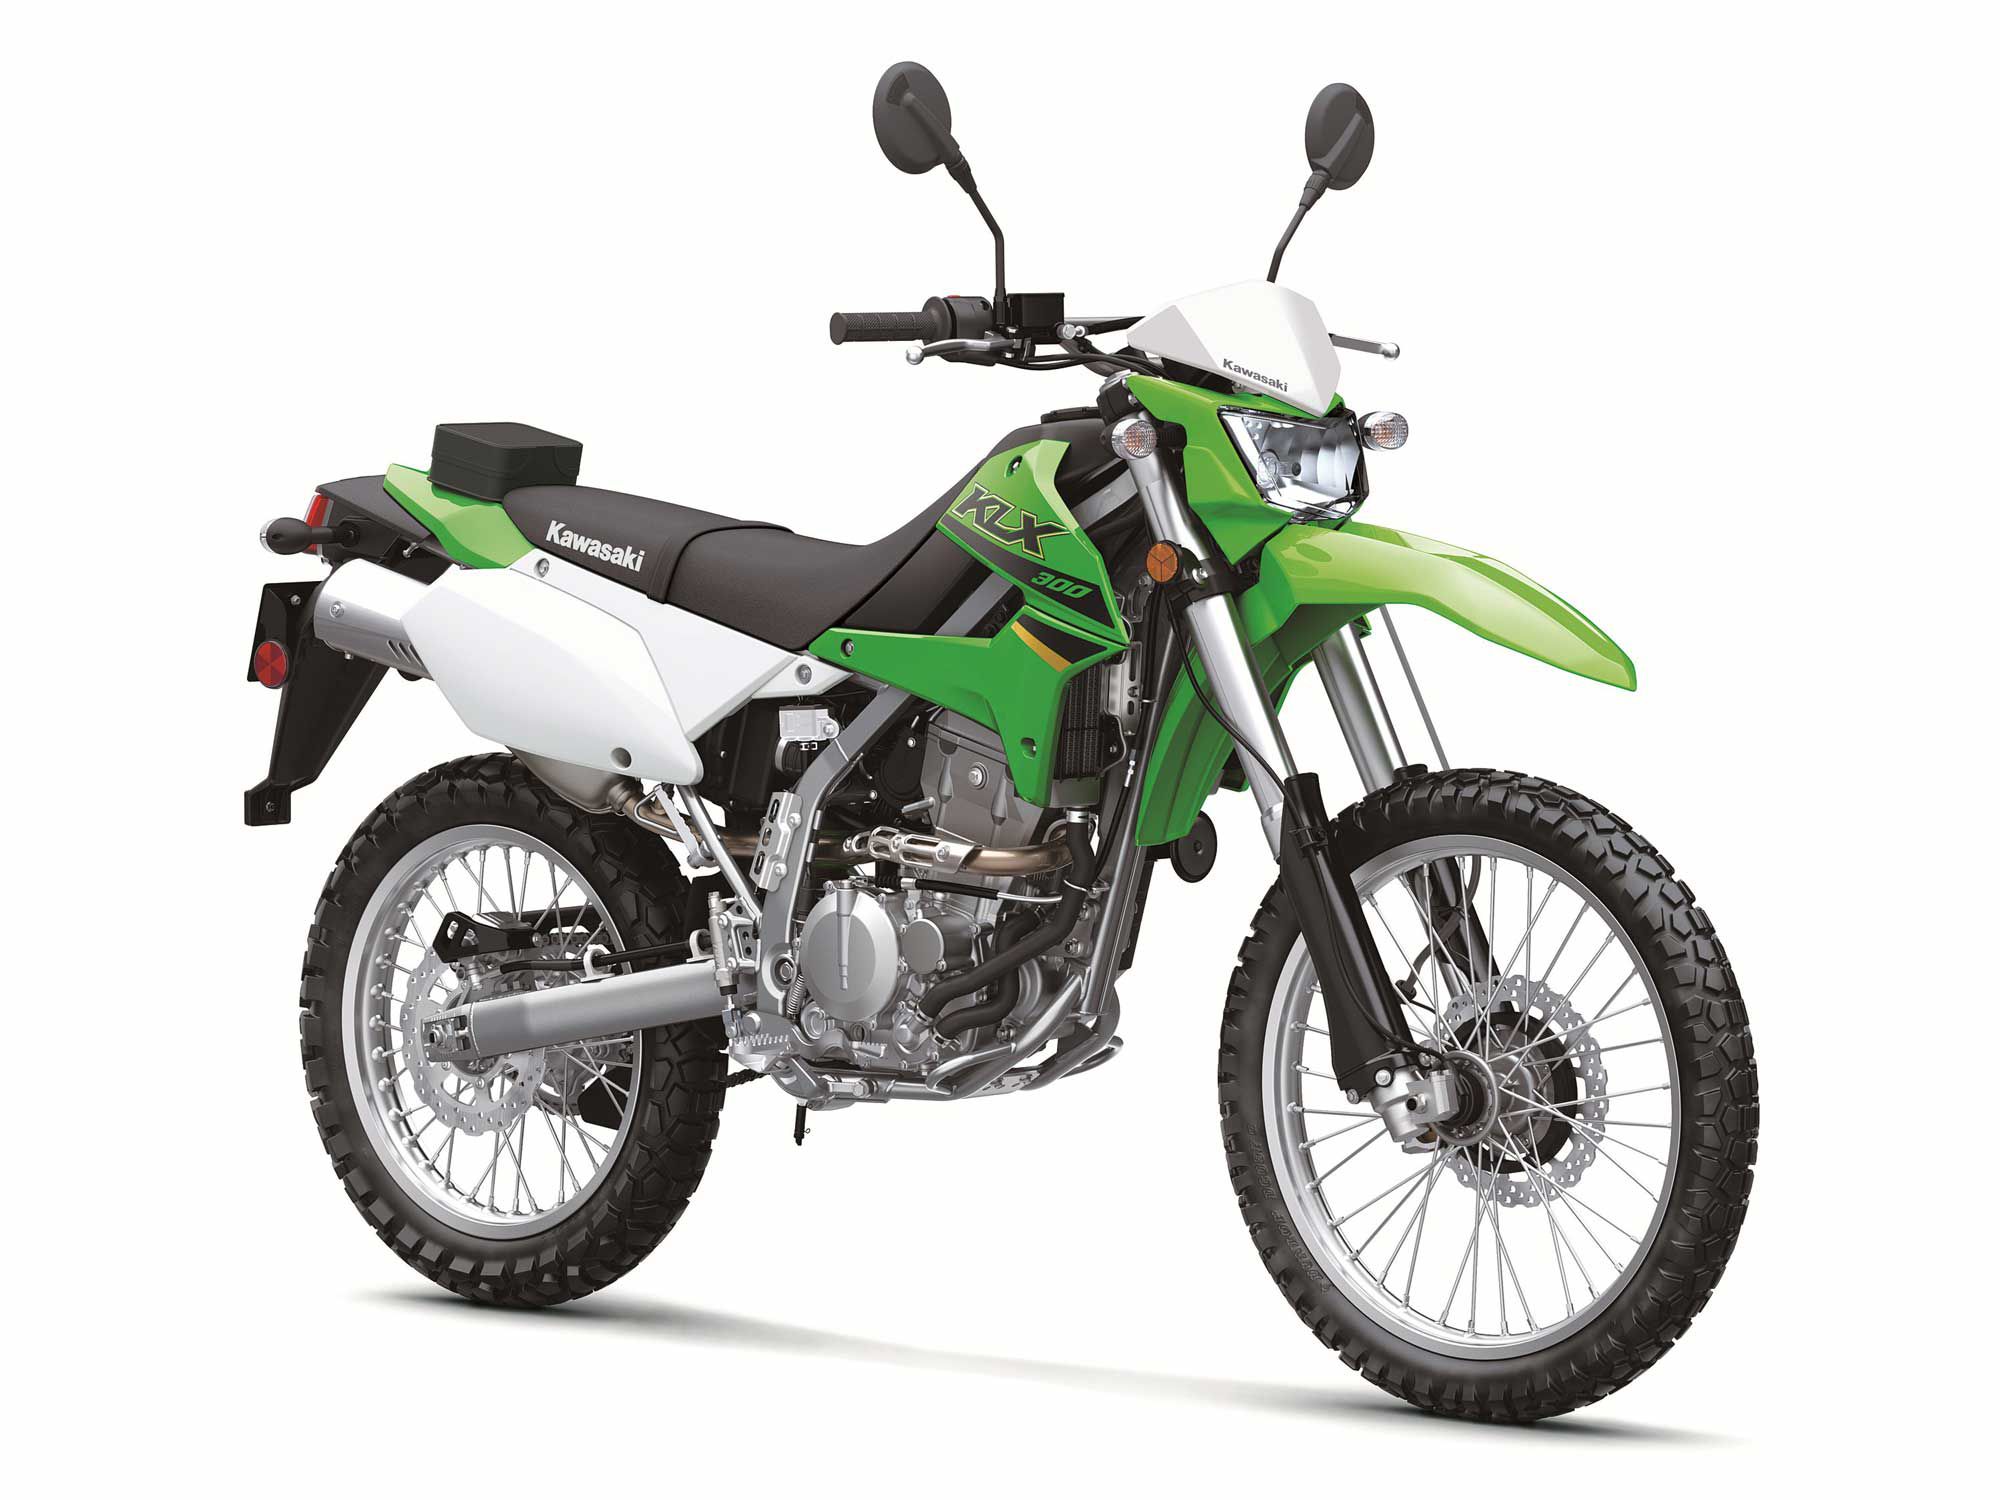 Kawasaki’s 2022 KLX300 is ready to play, wherever you want to go.